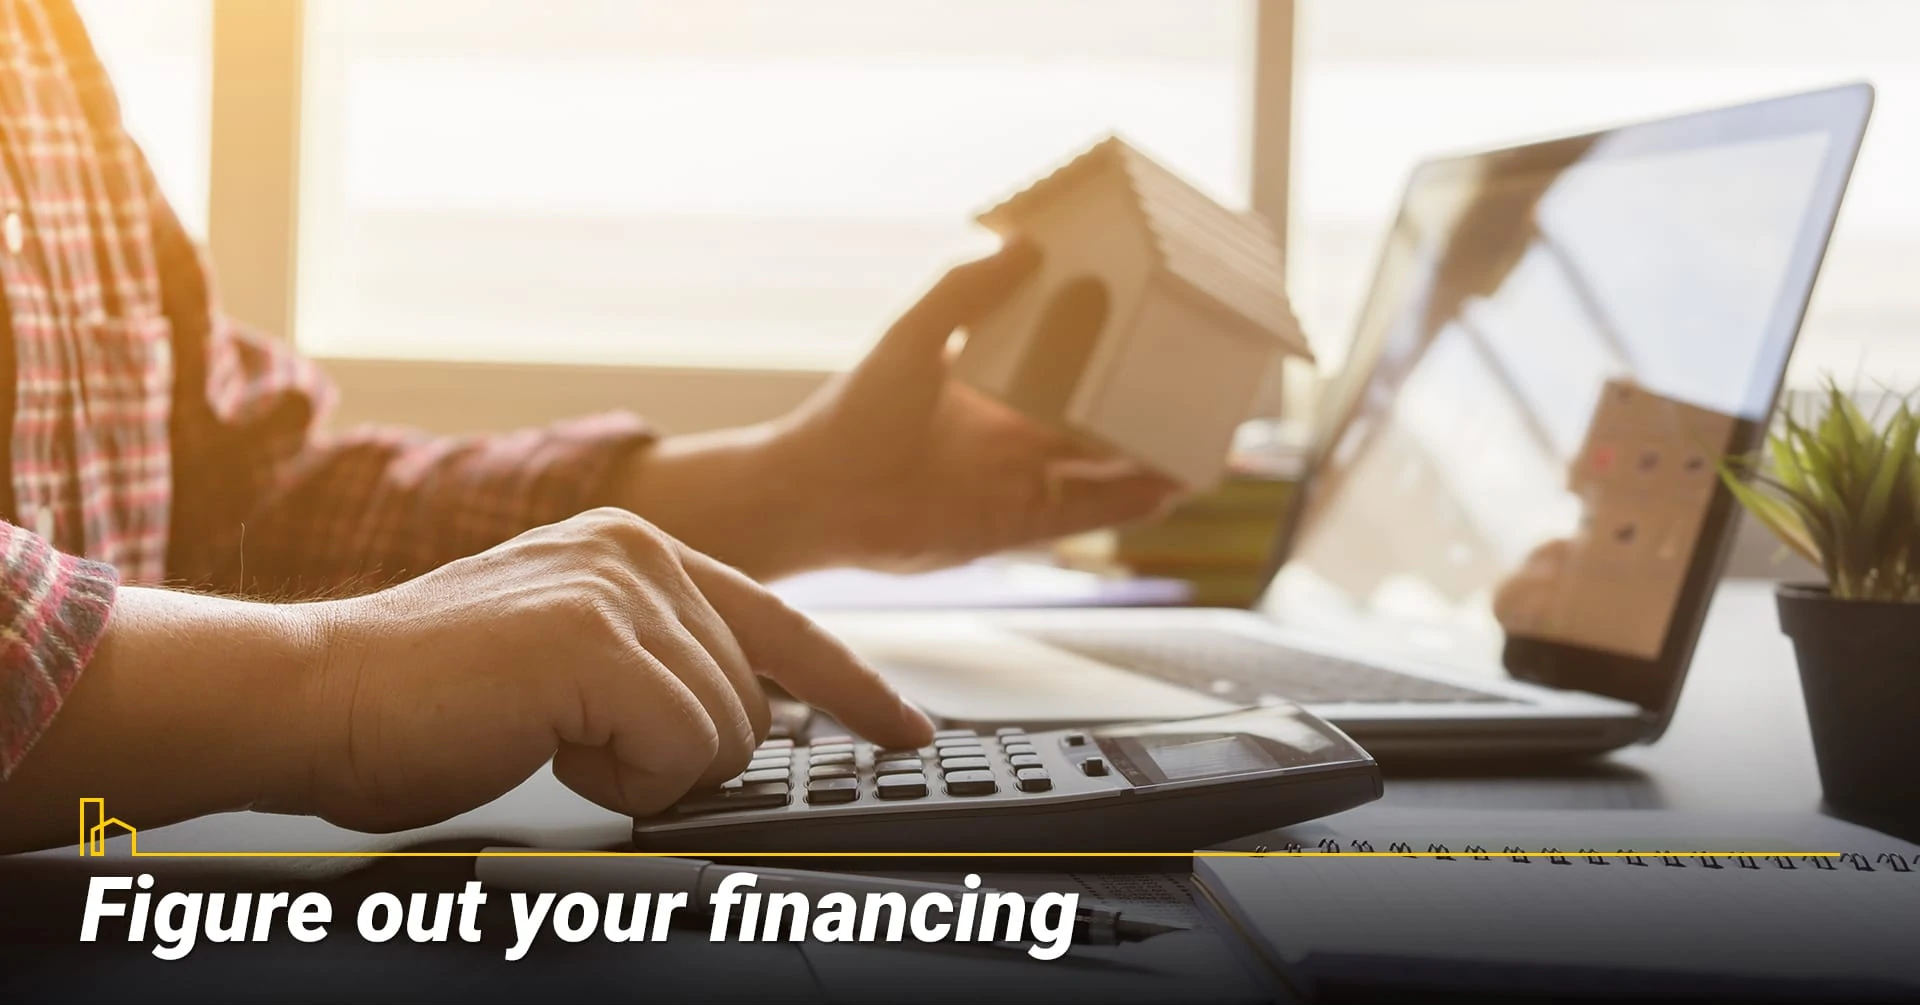 Figure out your financing, finance your home